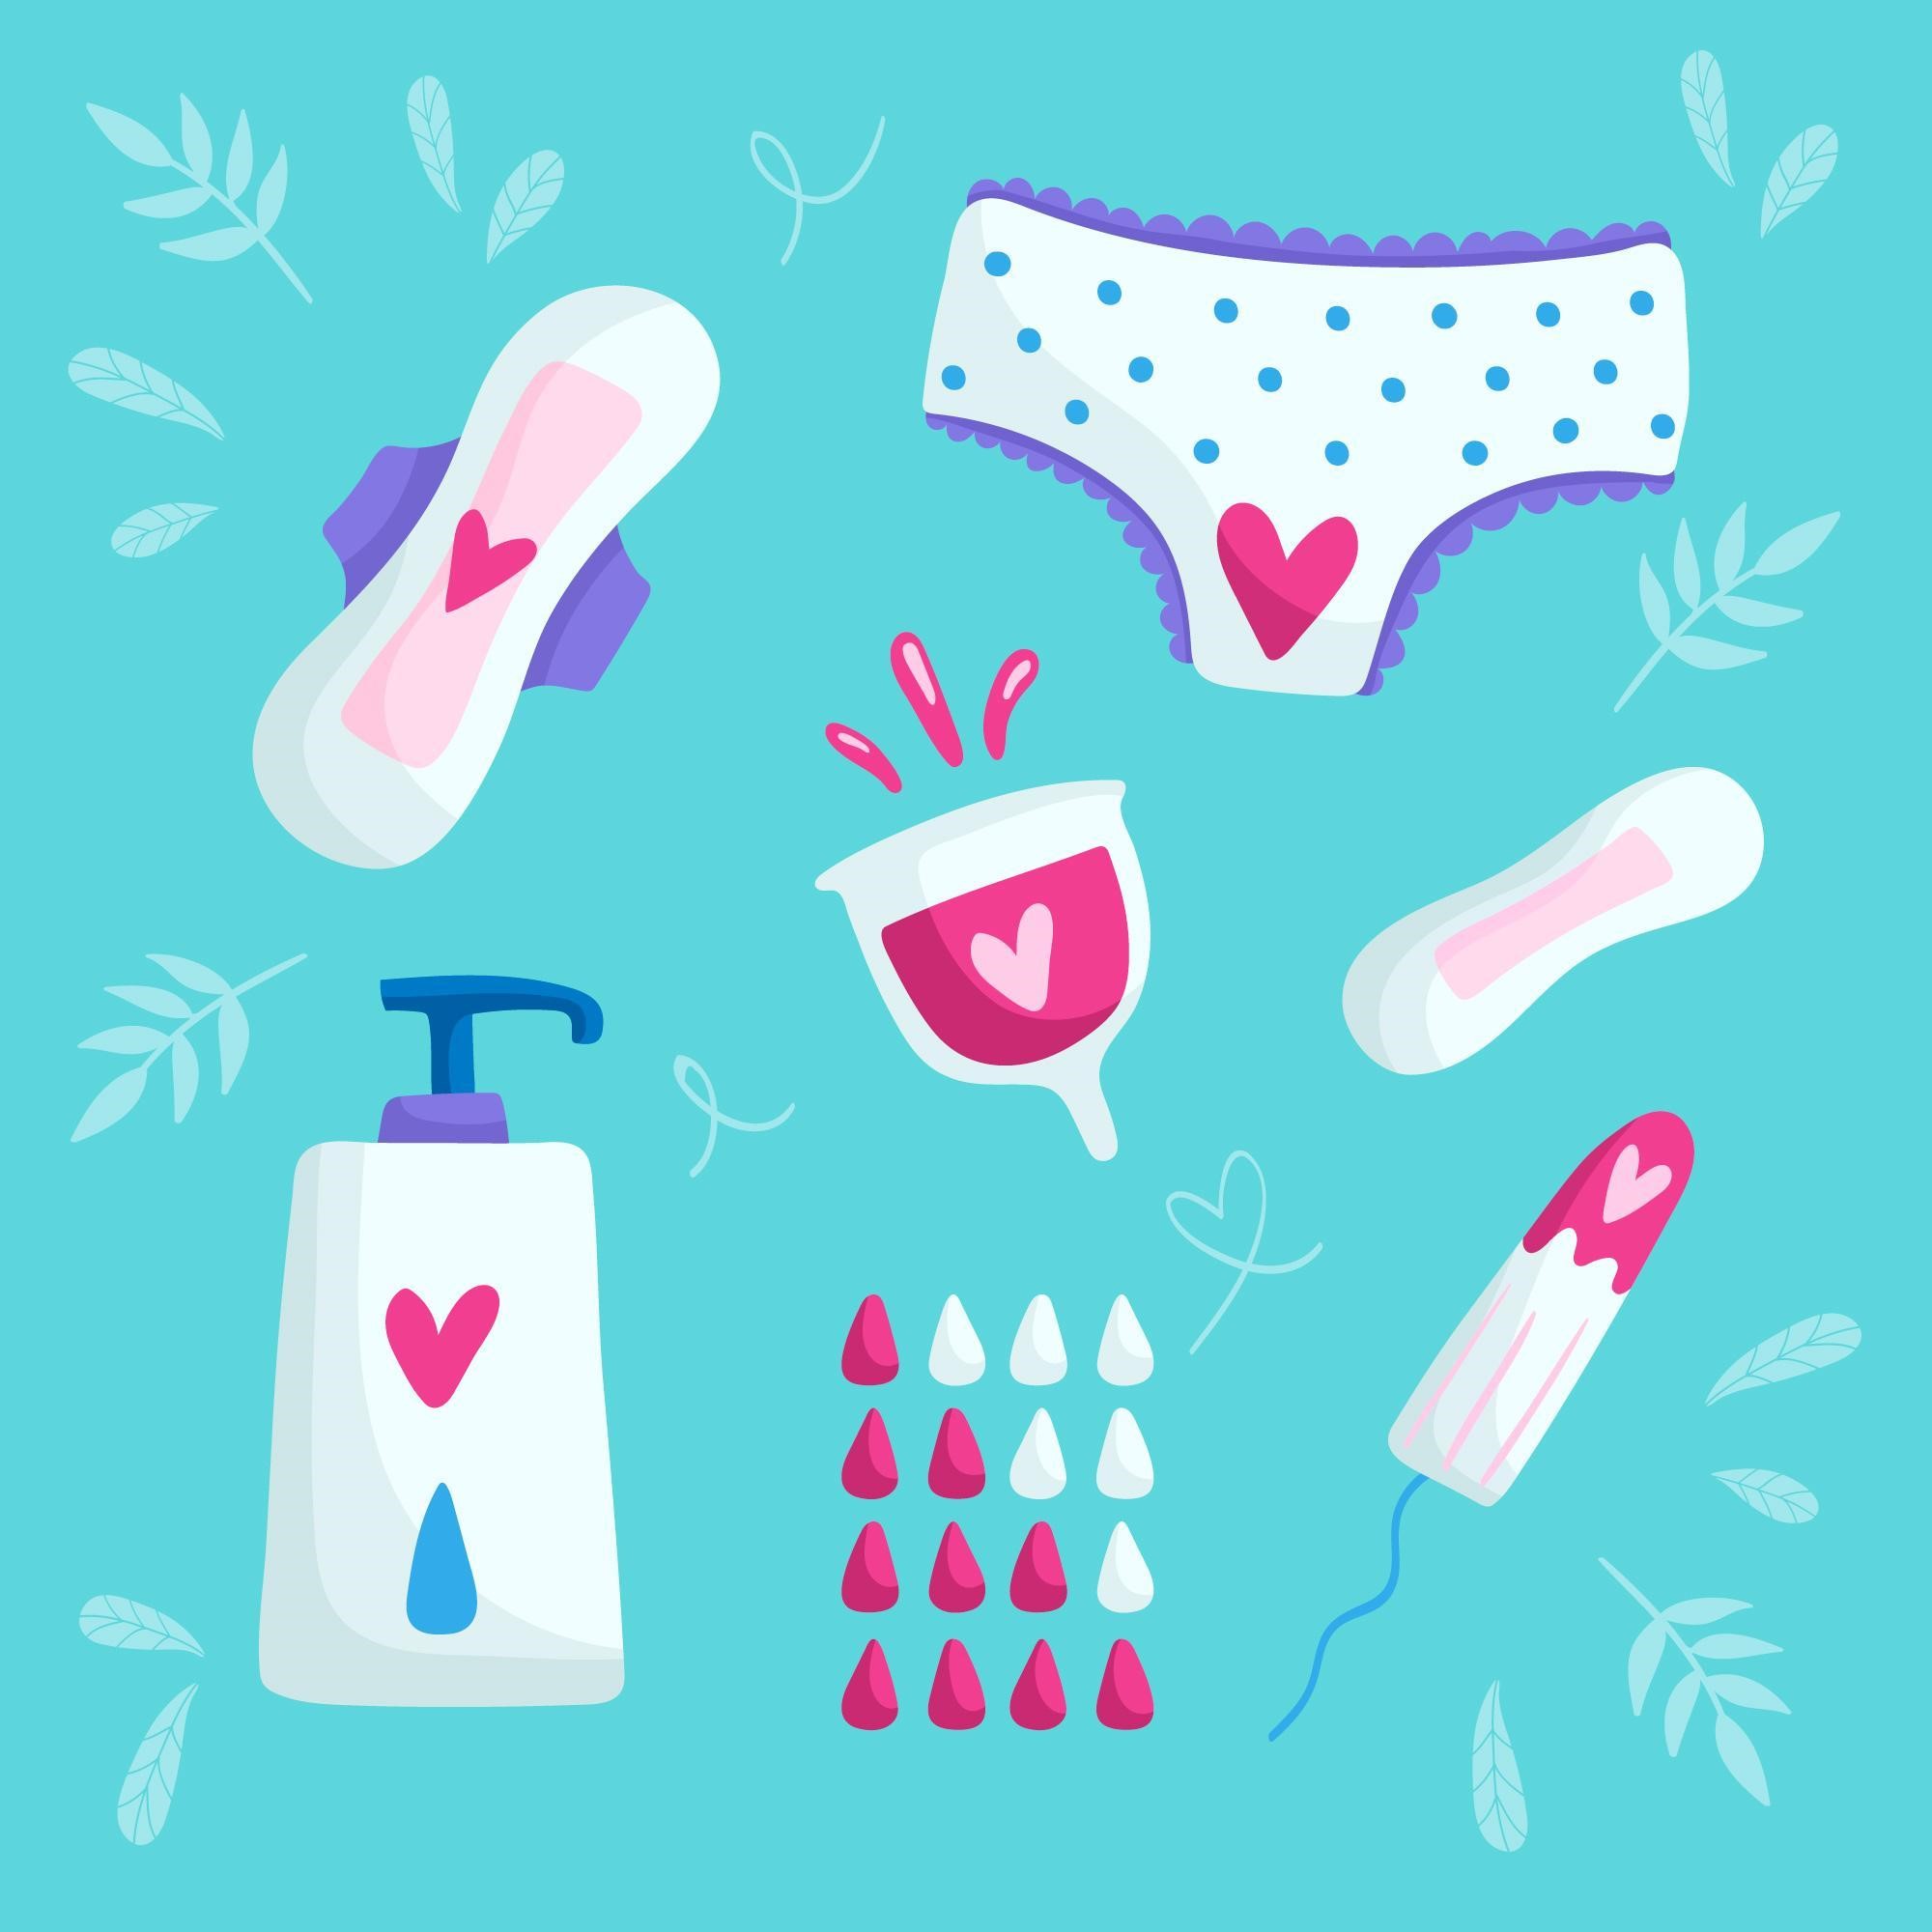 How to Use Menstrual Cups